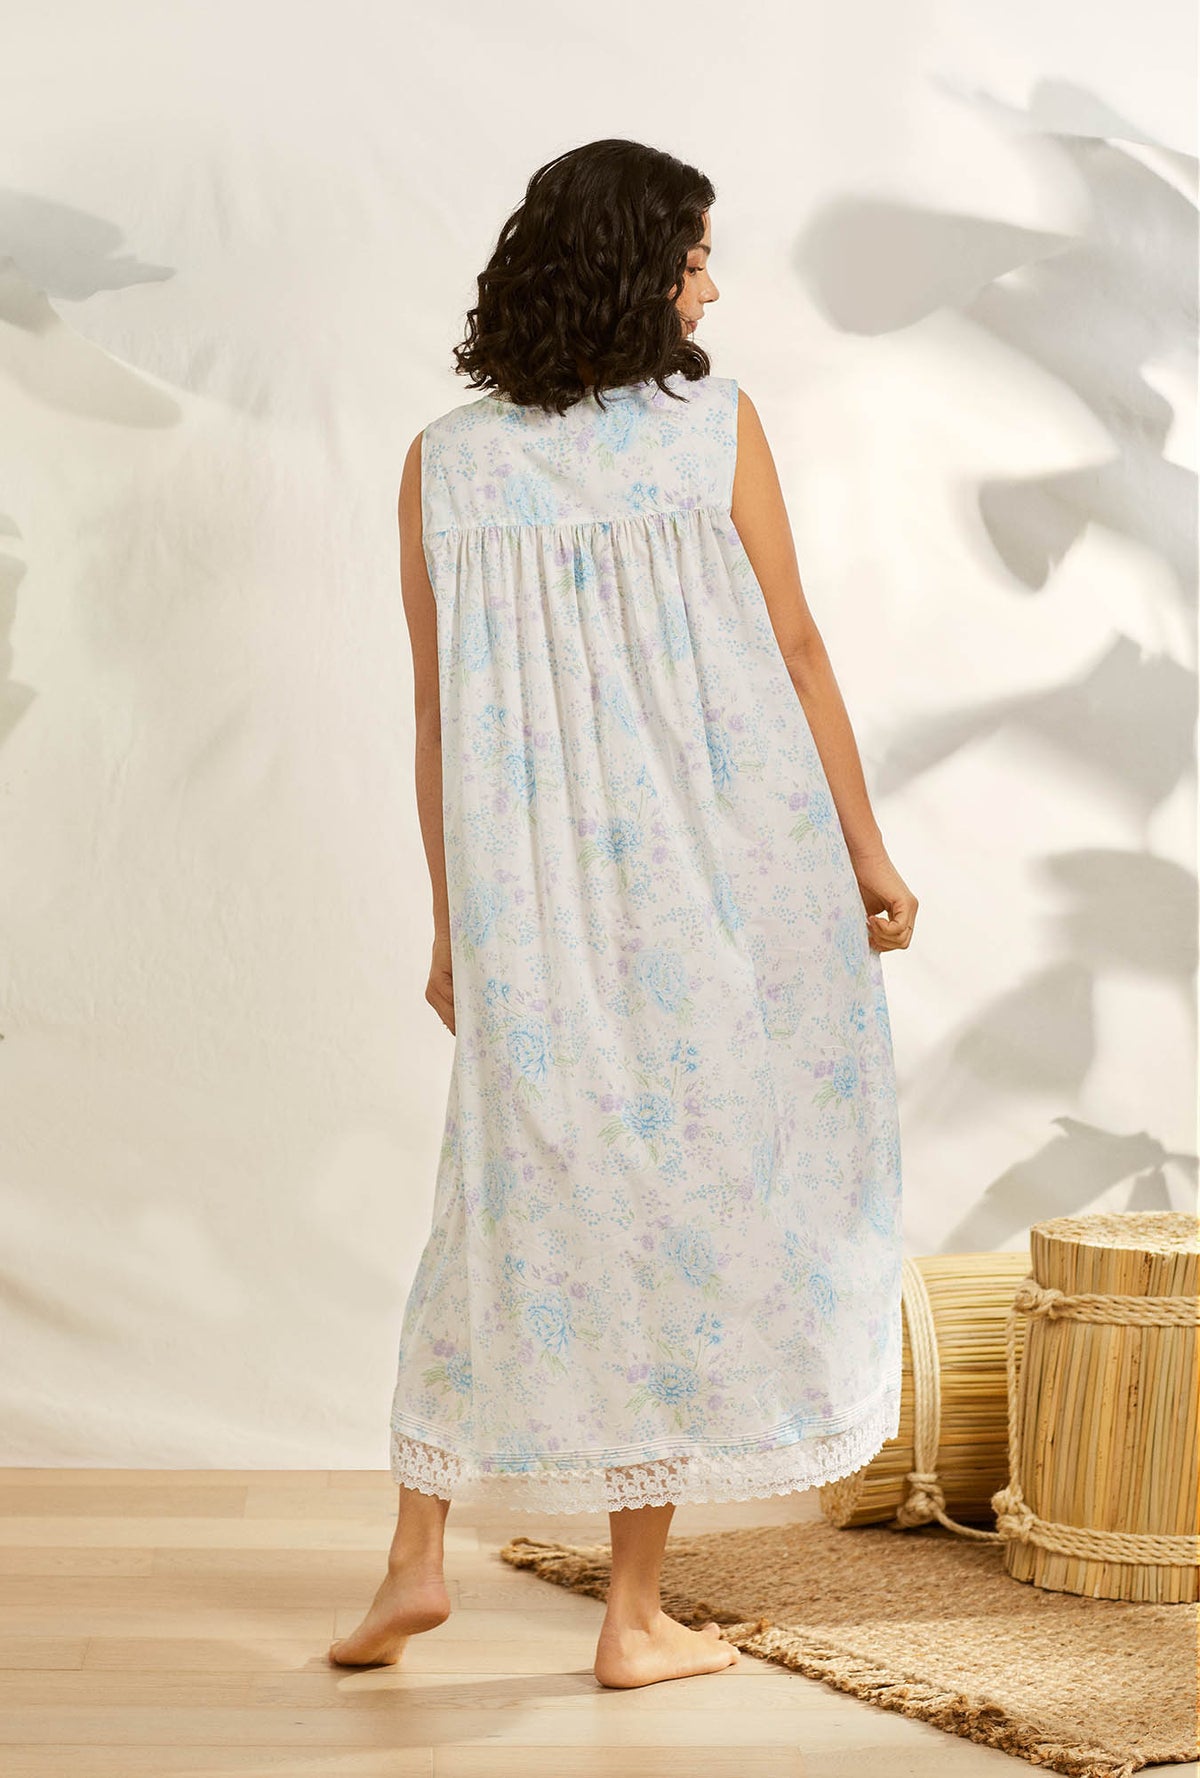 A lady wearing white sleeveless eileen cotton nightgown with summer garden print.